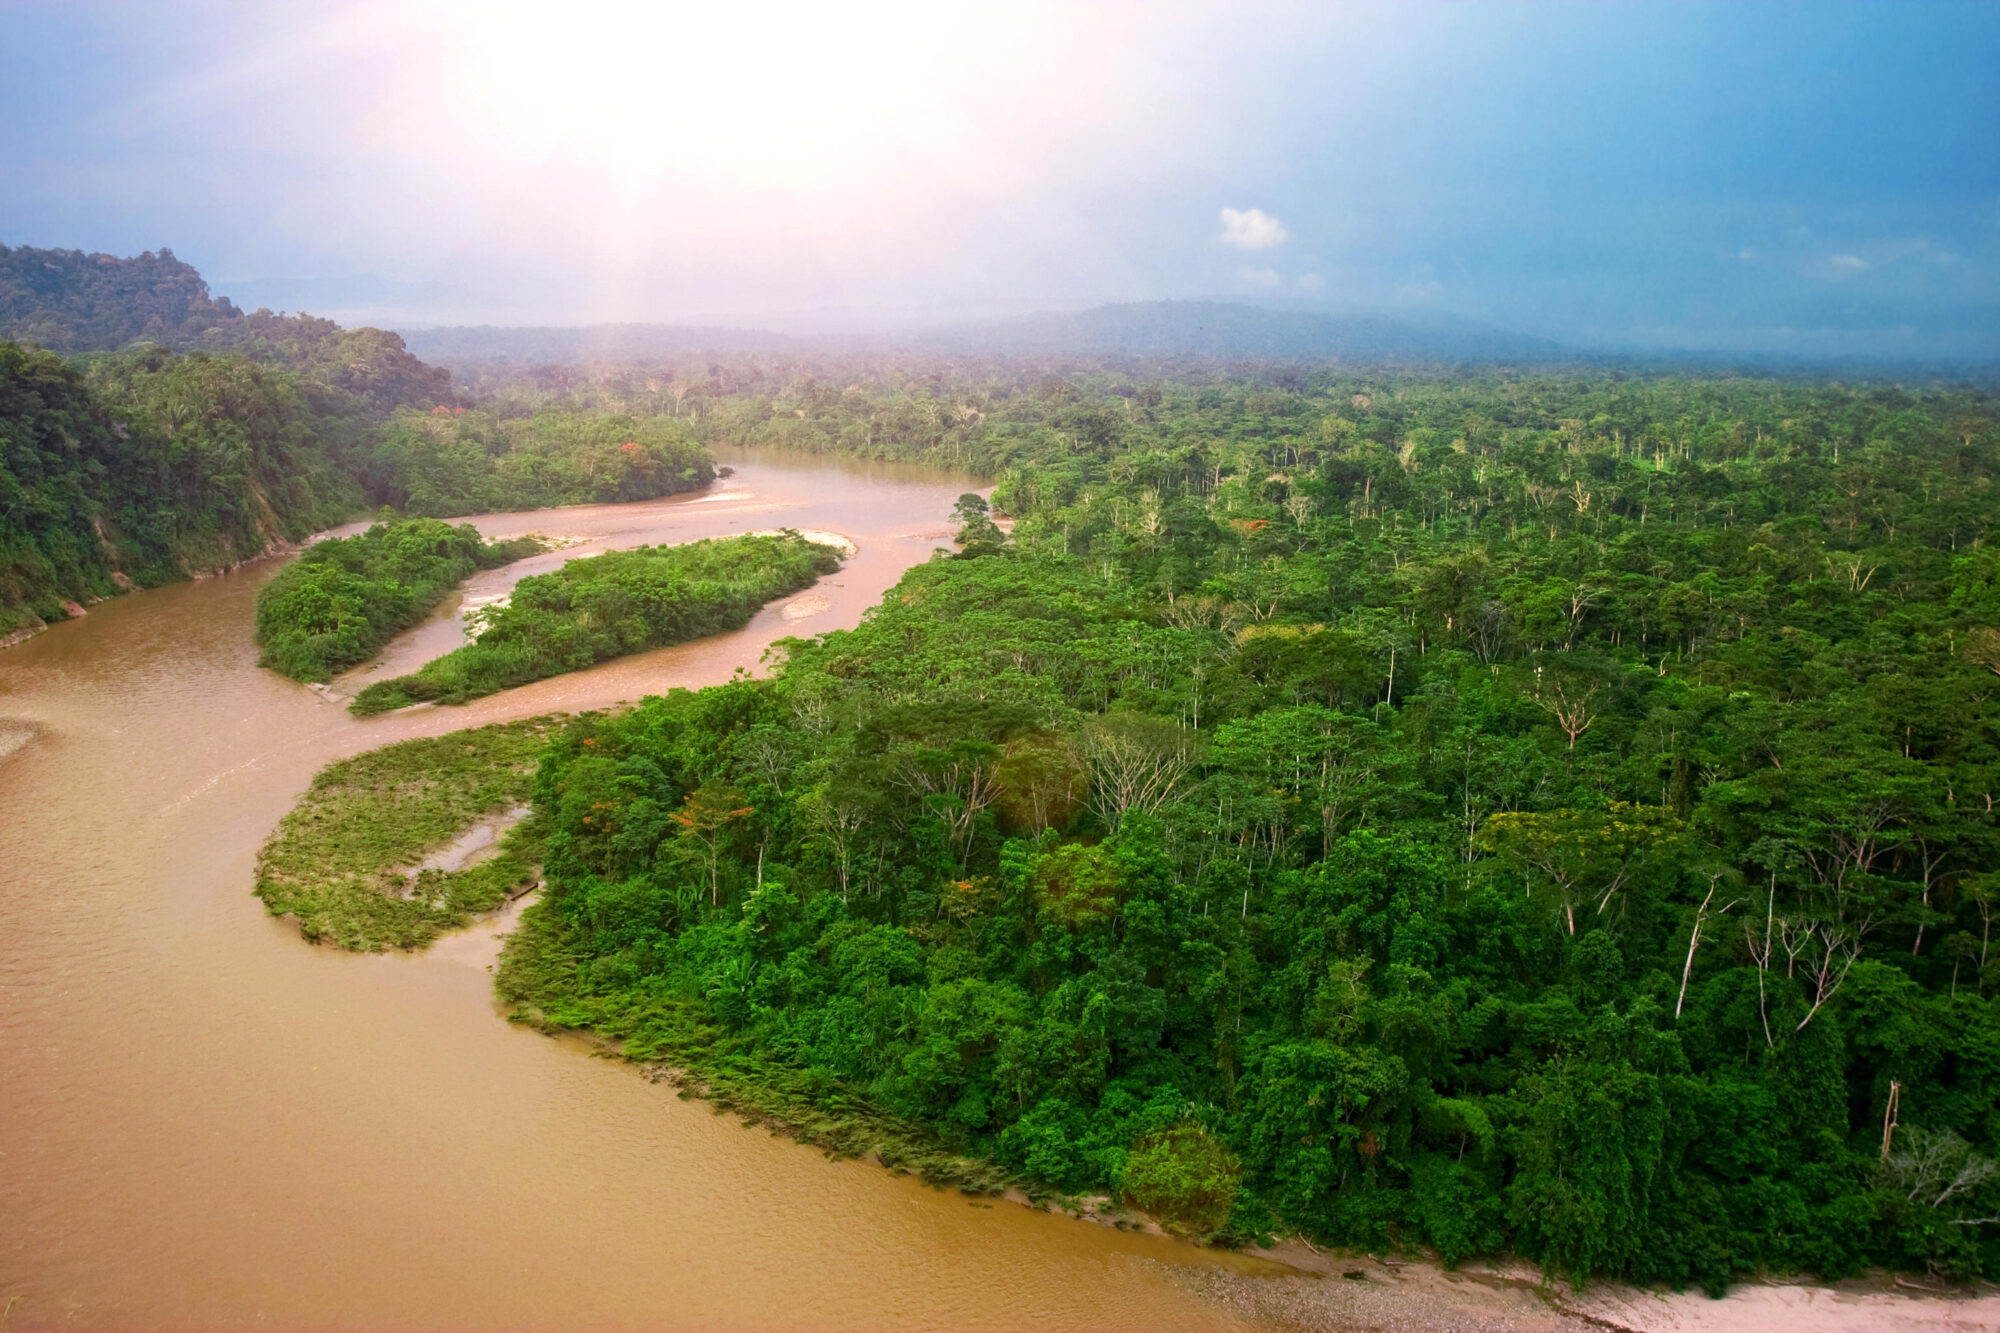 <p>The Napo river in the Ecuadorian Amazon. Debt-for-nature swaps with China could benefit conservation of Ecuador&#8217;s forests and rich biodiversity, while alleviating the country&#8217;s debt problems. (Image: Antisana / Alamy)</p>